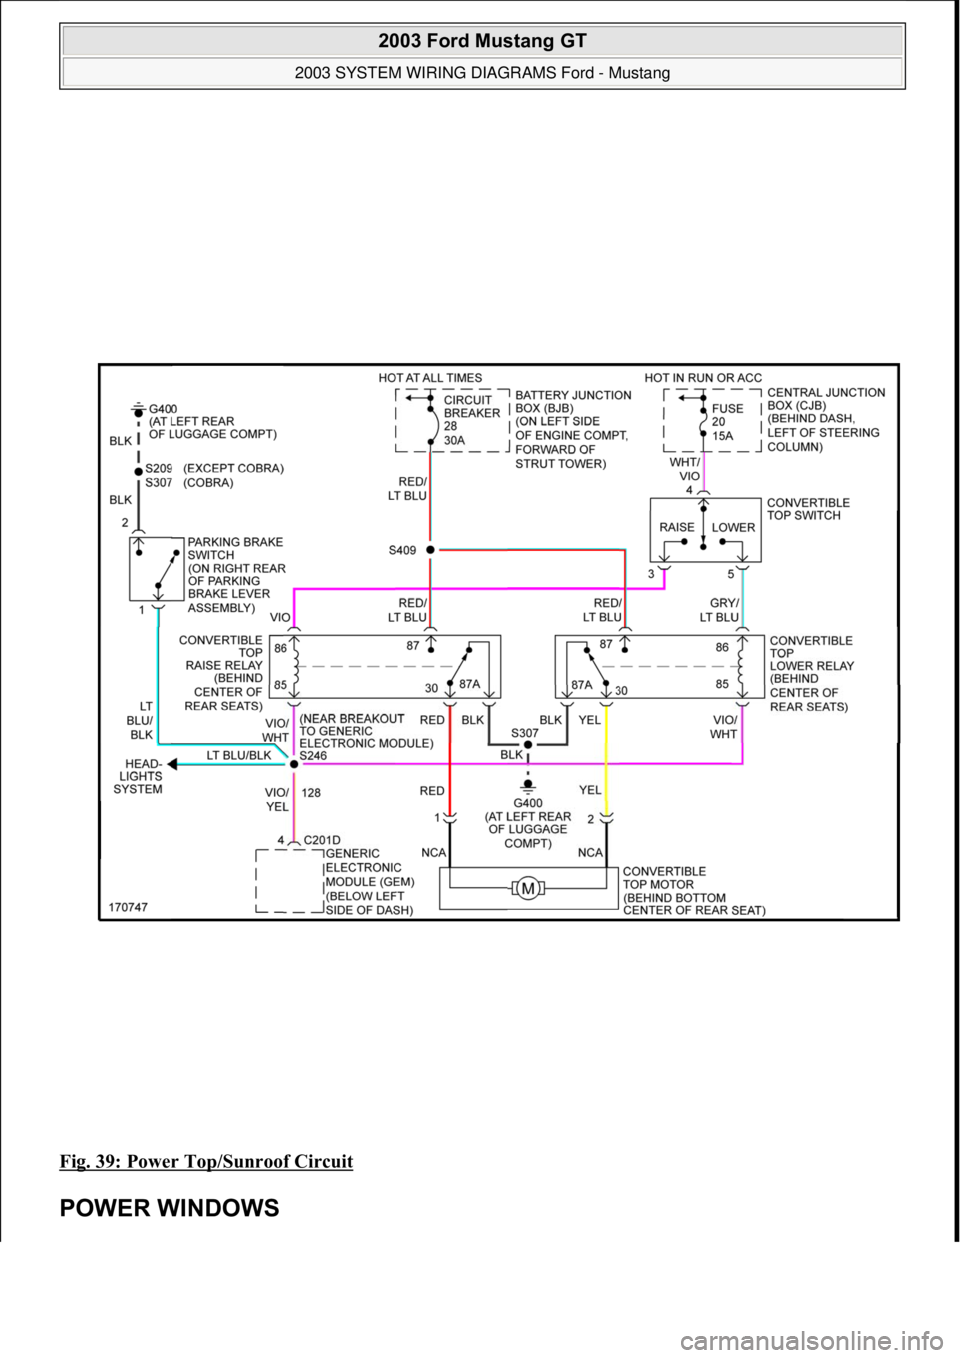 FORD MUSTANG 2003  Workshop Manual Fig. 39: Power Top/Sunroof Circuit 
POWER WINDOWS 
 
2003 Ford Mustang GT 
2003 SYSTEM WIRING DIAGRAMS Ford - Mustang  
111  
18 ноября  2011 г. 12:50:34Page 40 © 2006 Mitchell Repair Informat